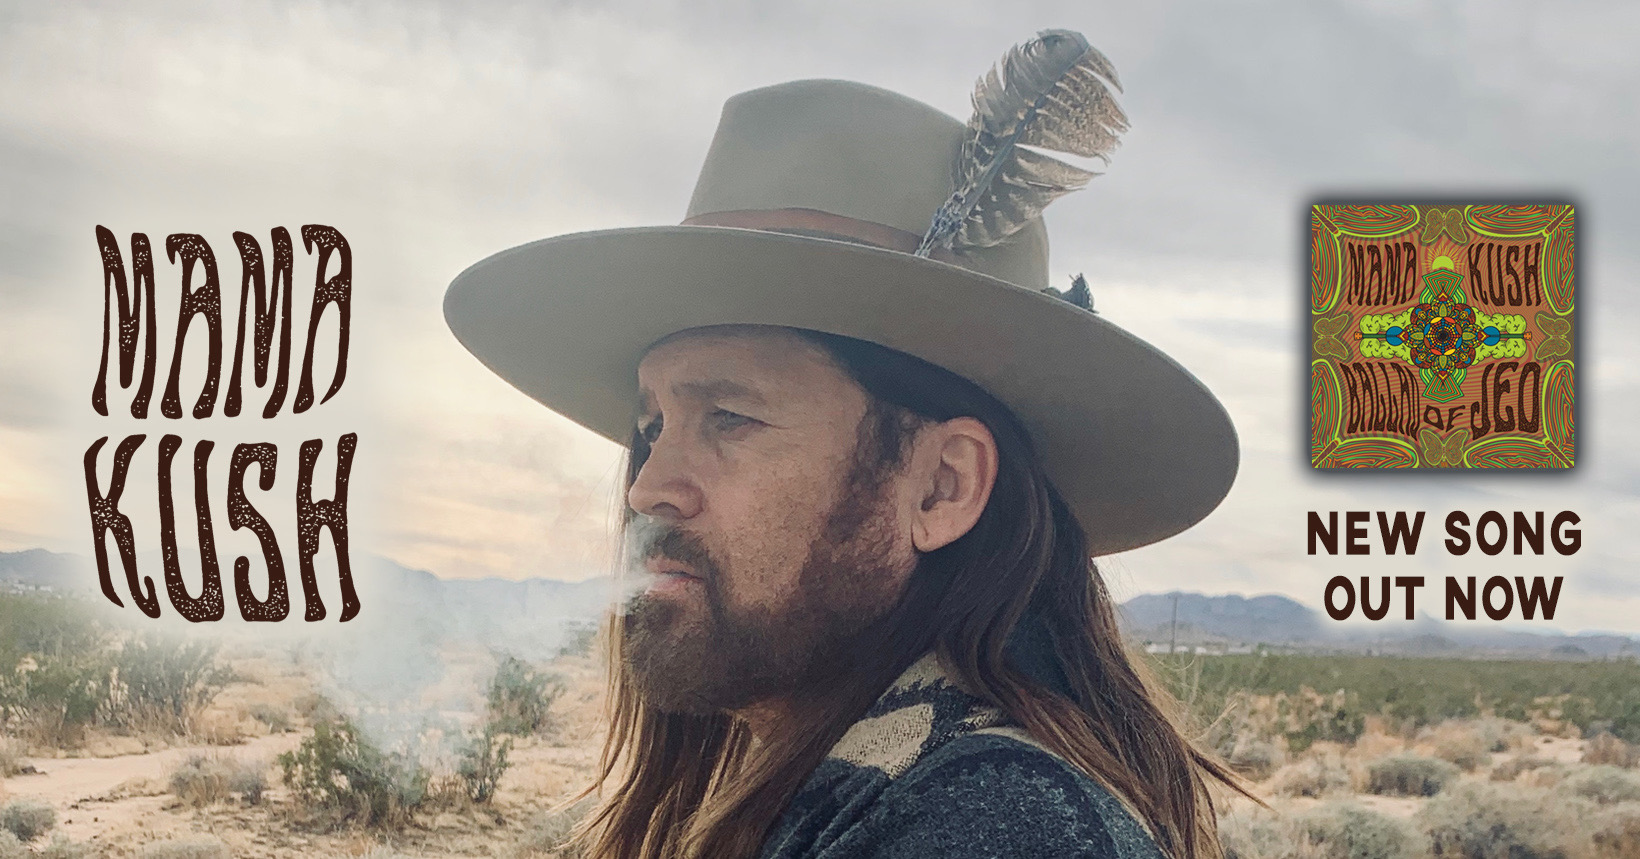 Billy Ray Cyrus Drops New Music and Animated Video on 4/20: "Ballad of Jed" from New Project MAMA KUSH